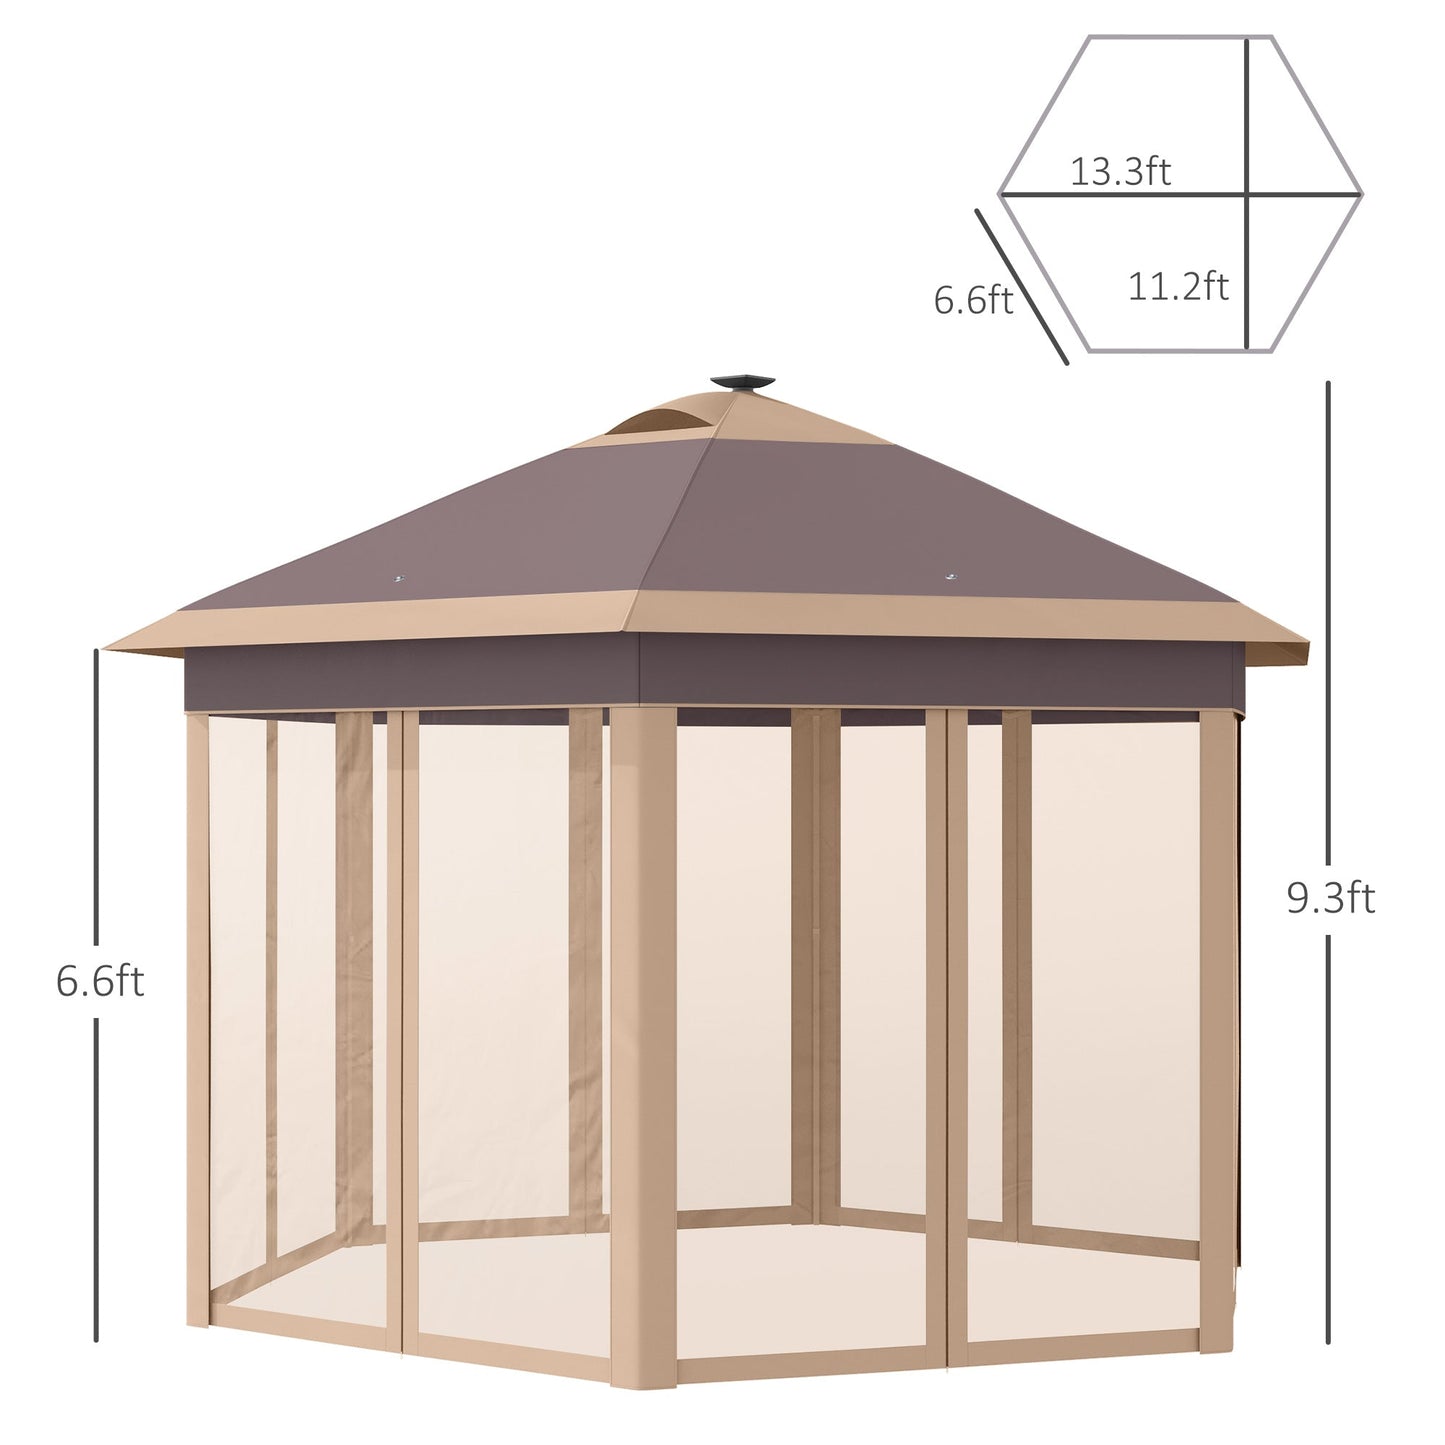 Outdoor and Garden-13' x 11' Pop Up Gazebo Tent, Hexagonal Canopy w/ Solar LED Light, Remote Control, Mesh Netting, Height Adjustable, Top Vents and Carrying- Beige - Outdoor Style Company